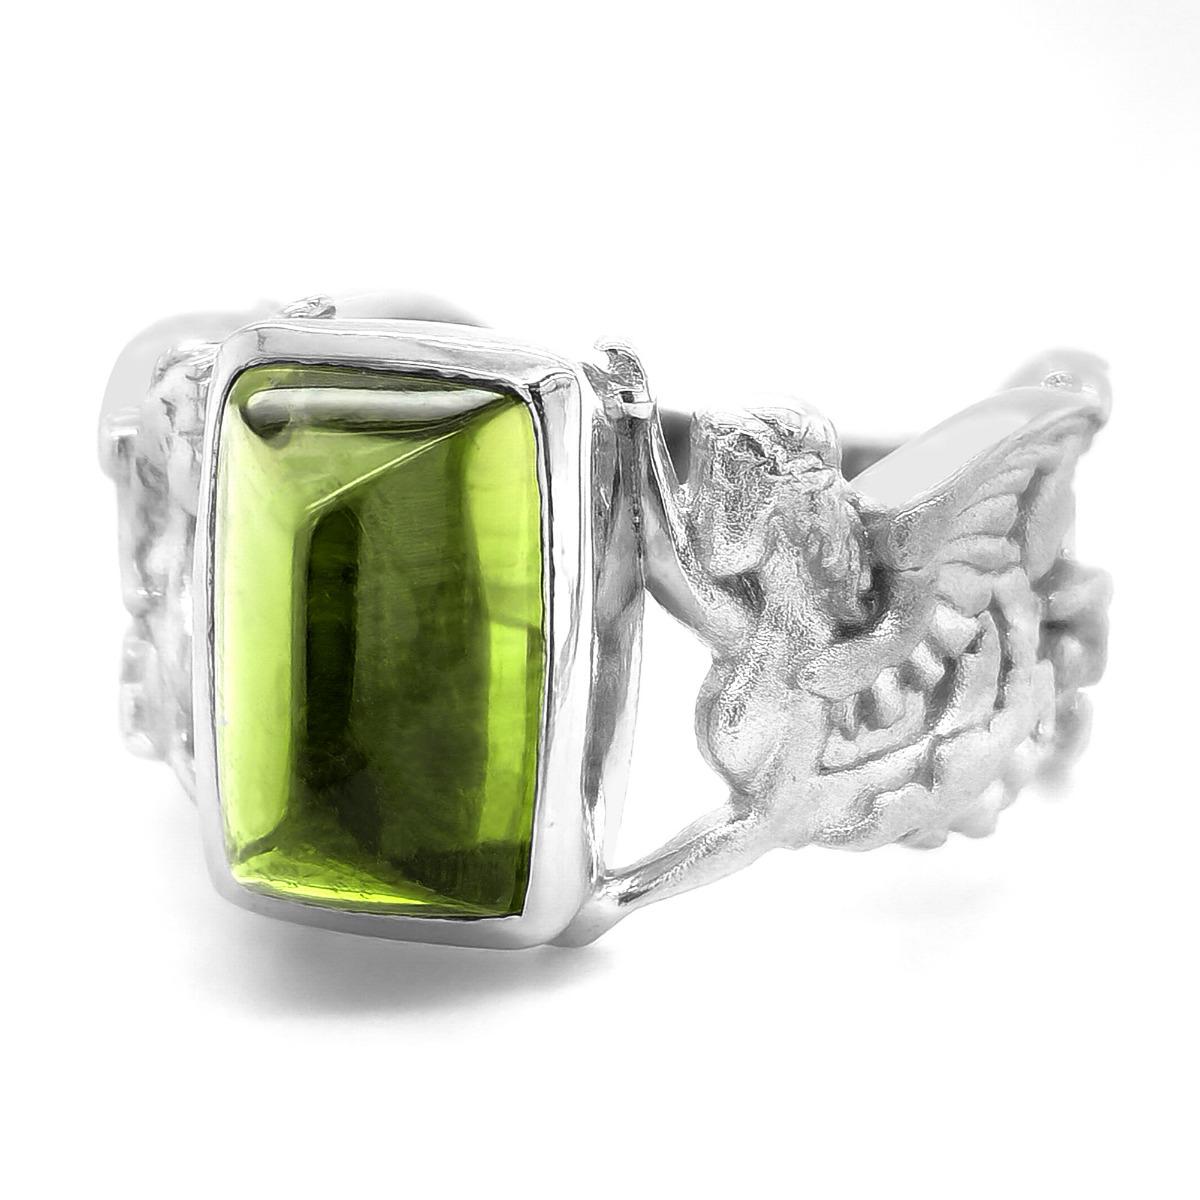 Tourmaline, with its rich symbolism of friendship and wealth, finds its exquisite embodiment in this finely crafted 5.74-carat gemstone. Expertly shaped as a cabochon, this gem's grandeur truly comes to life.
Ring Overview
SKU
4497
Center